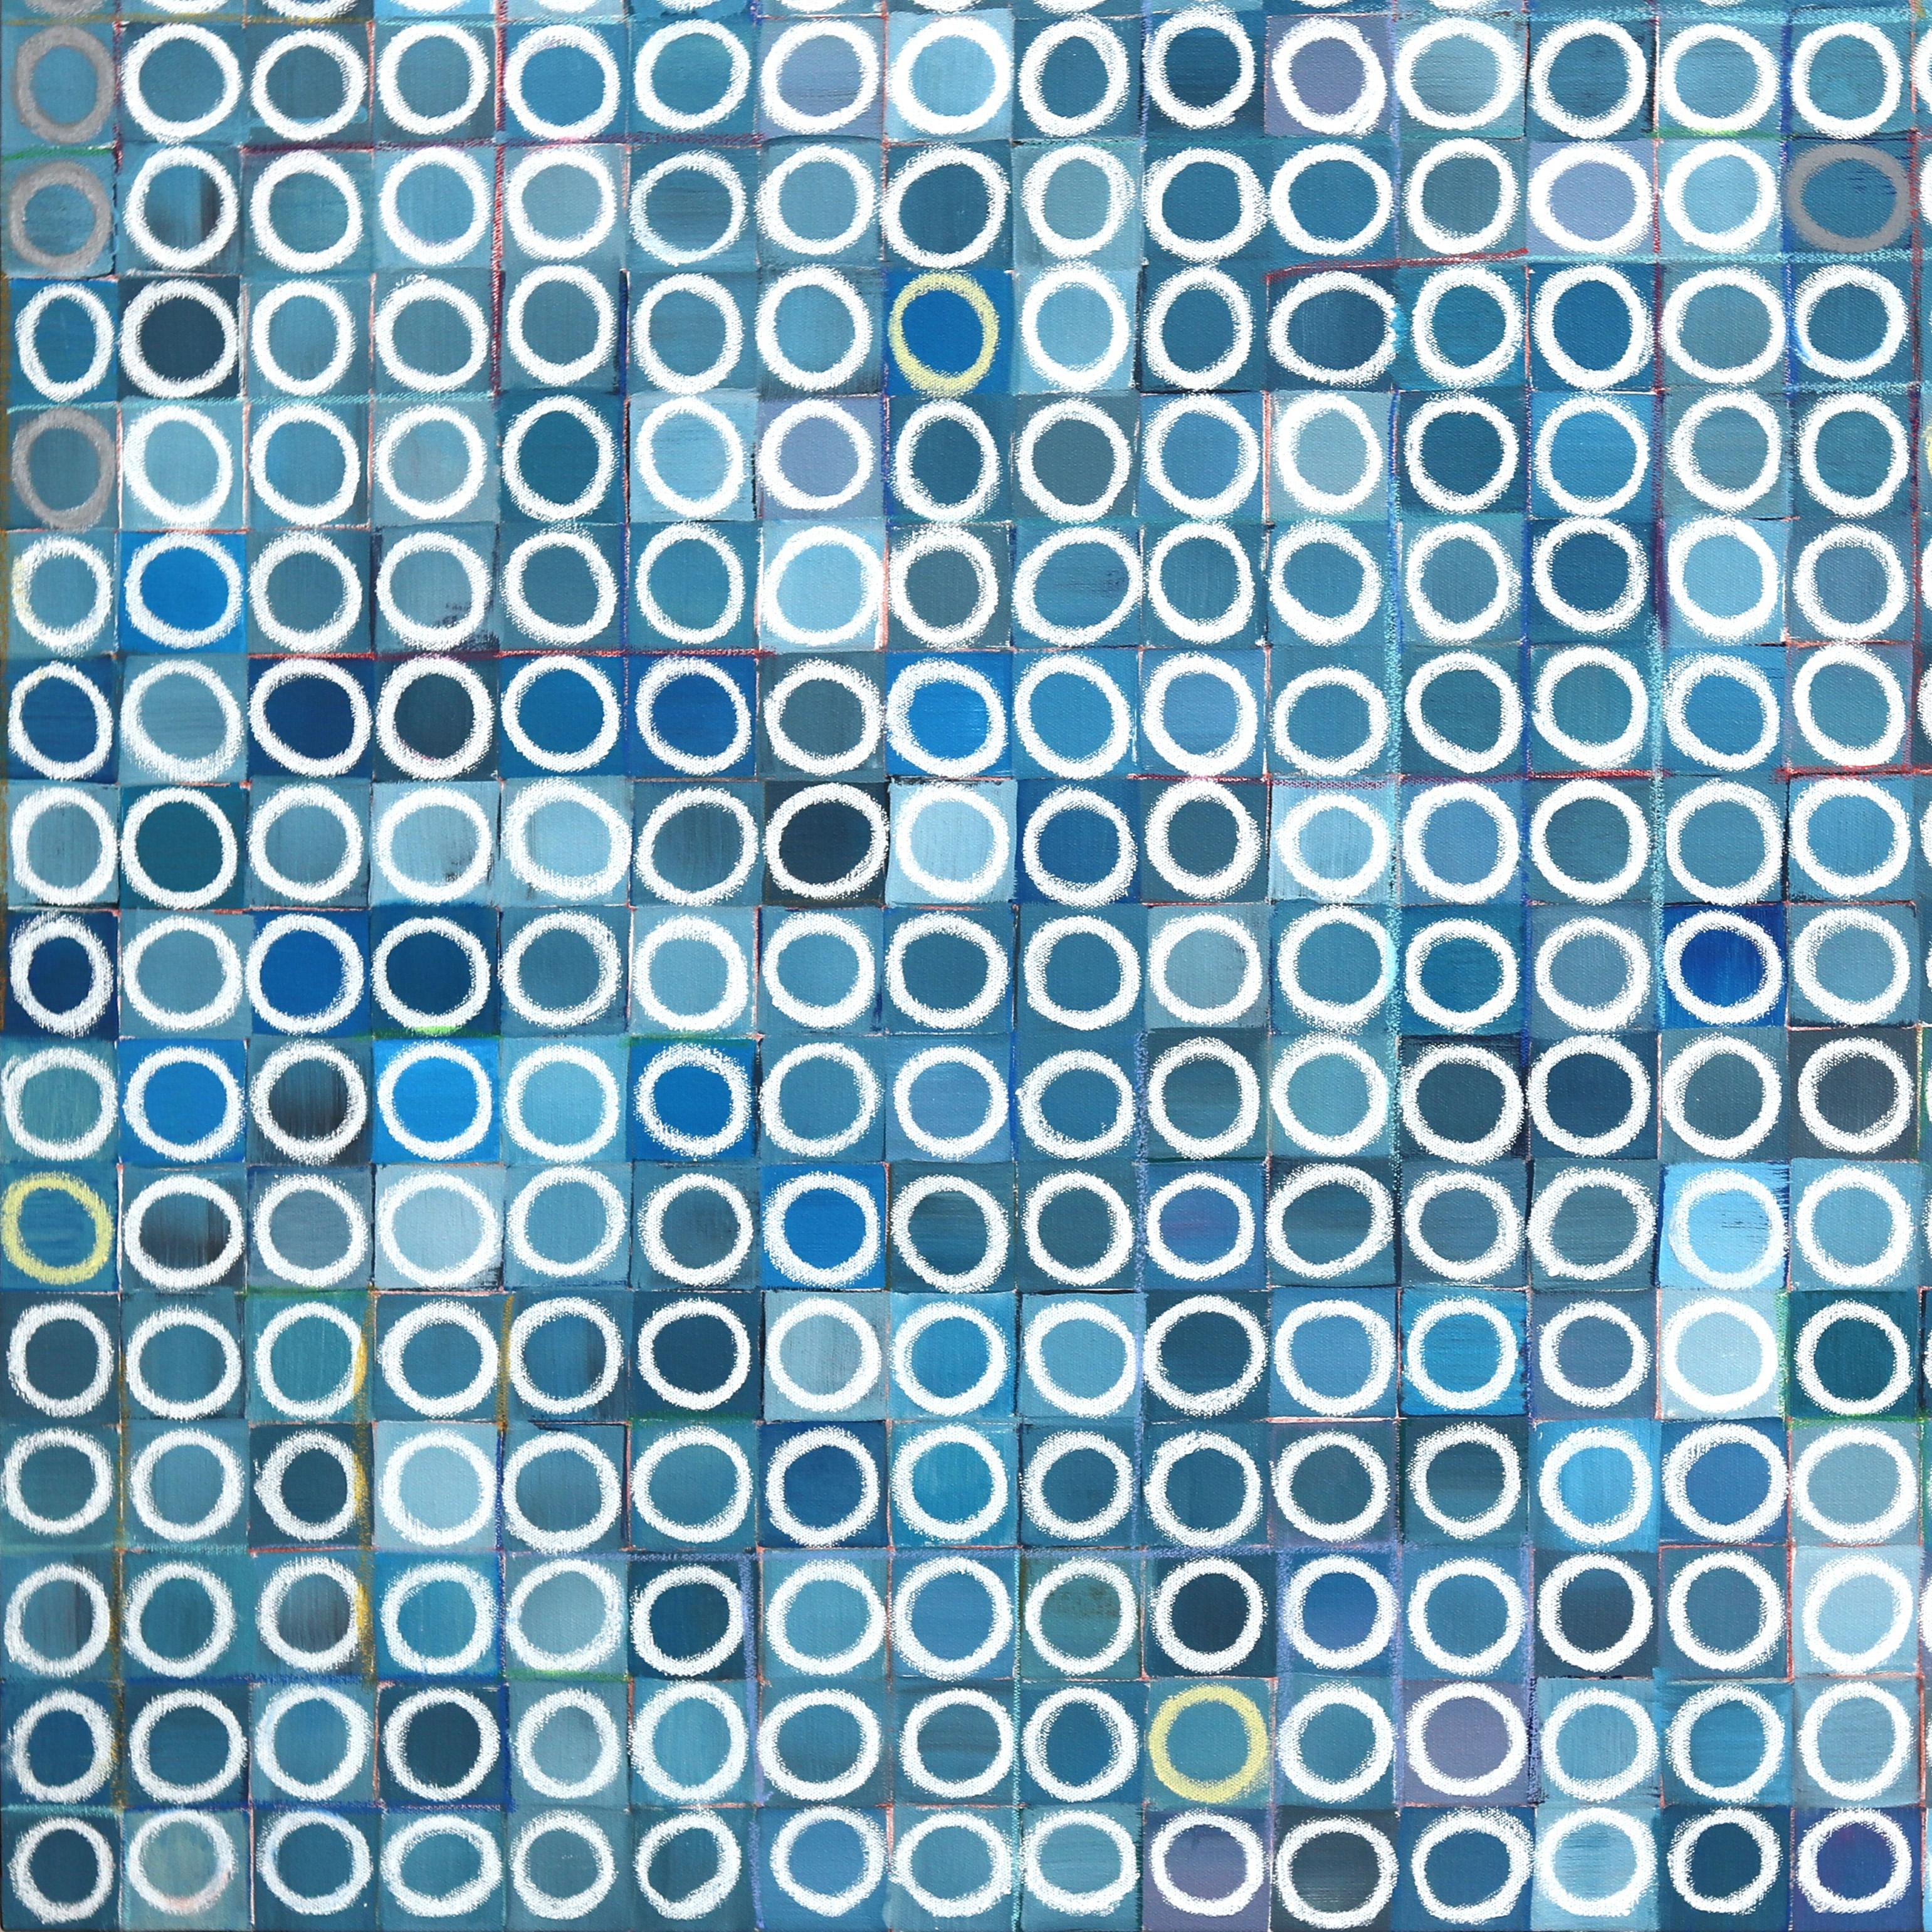 1089 Circles - Large Blue Abstract Geometric Original Painting For Sale 5